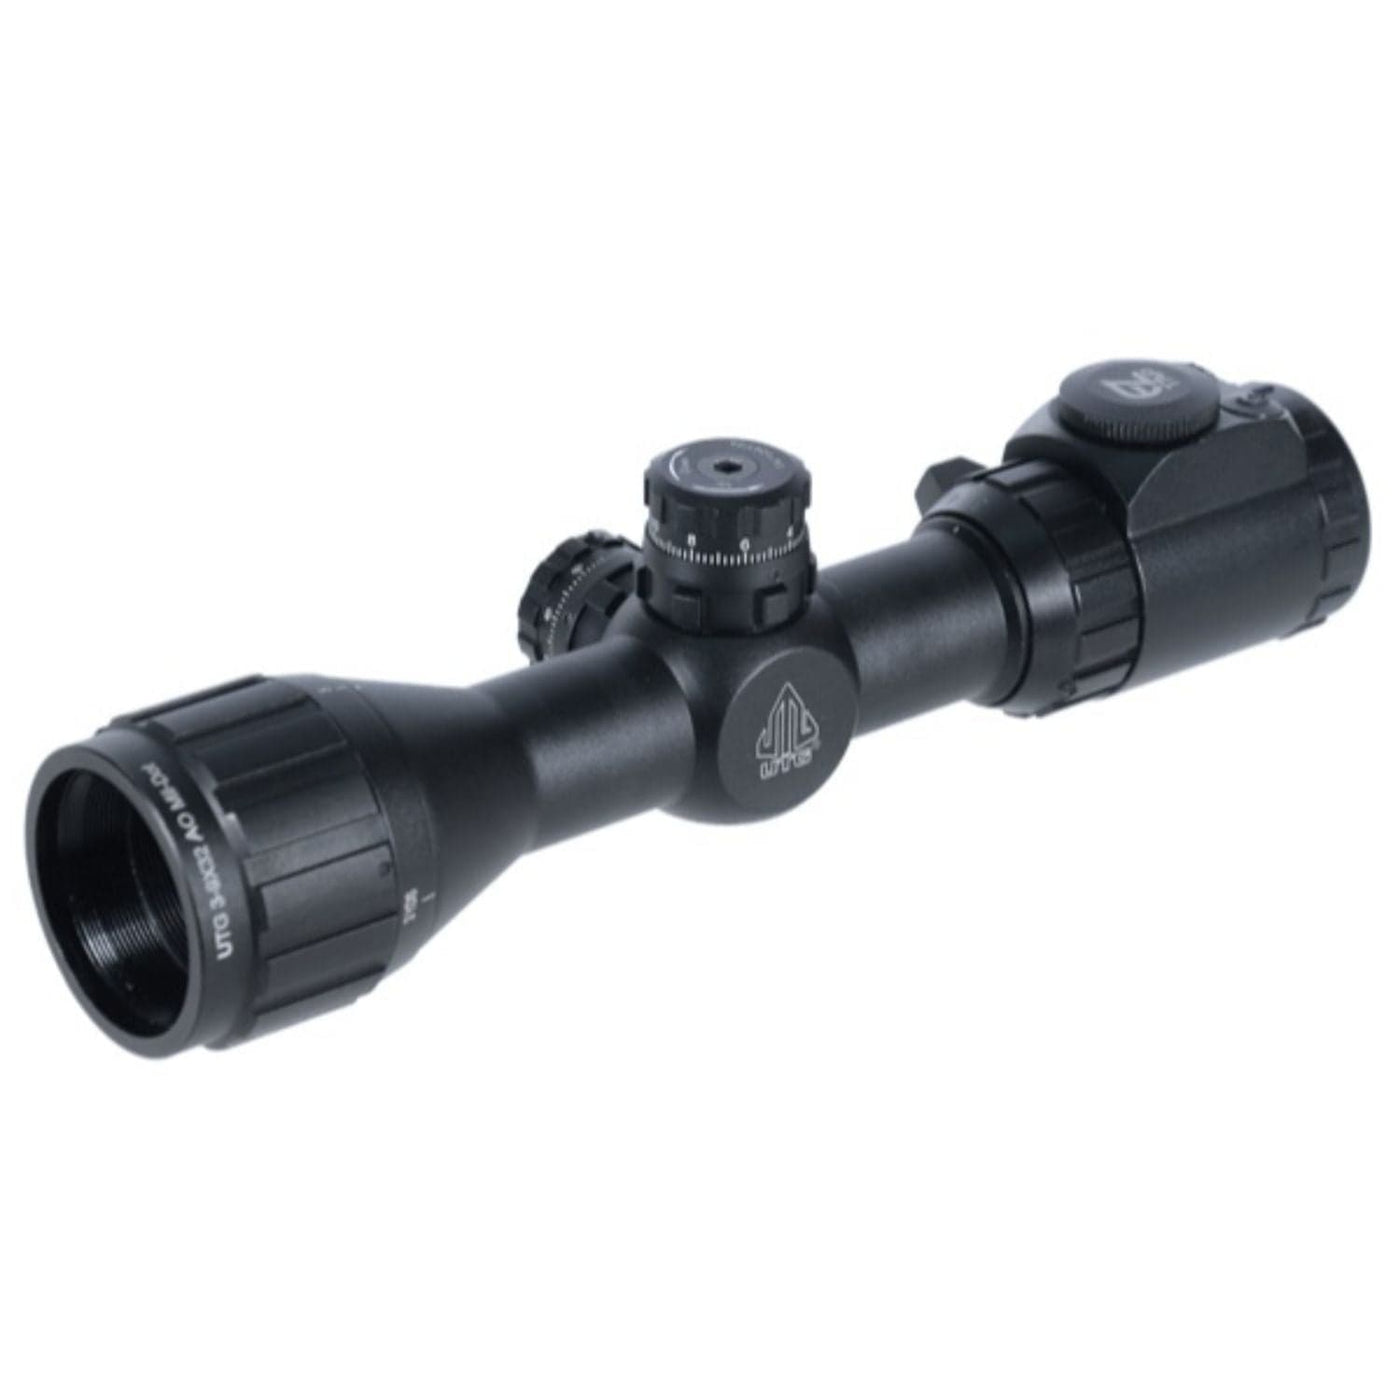 Leapers Leapers UTG 3-9X32 1in BugBuster AO Mil-dot Scope w Rings Optics And Sights